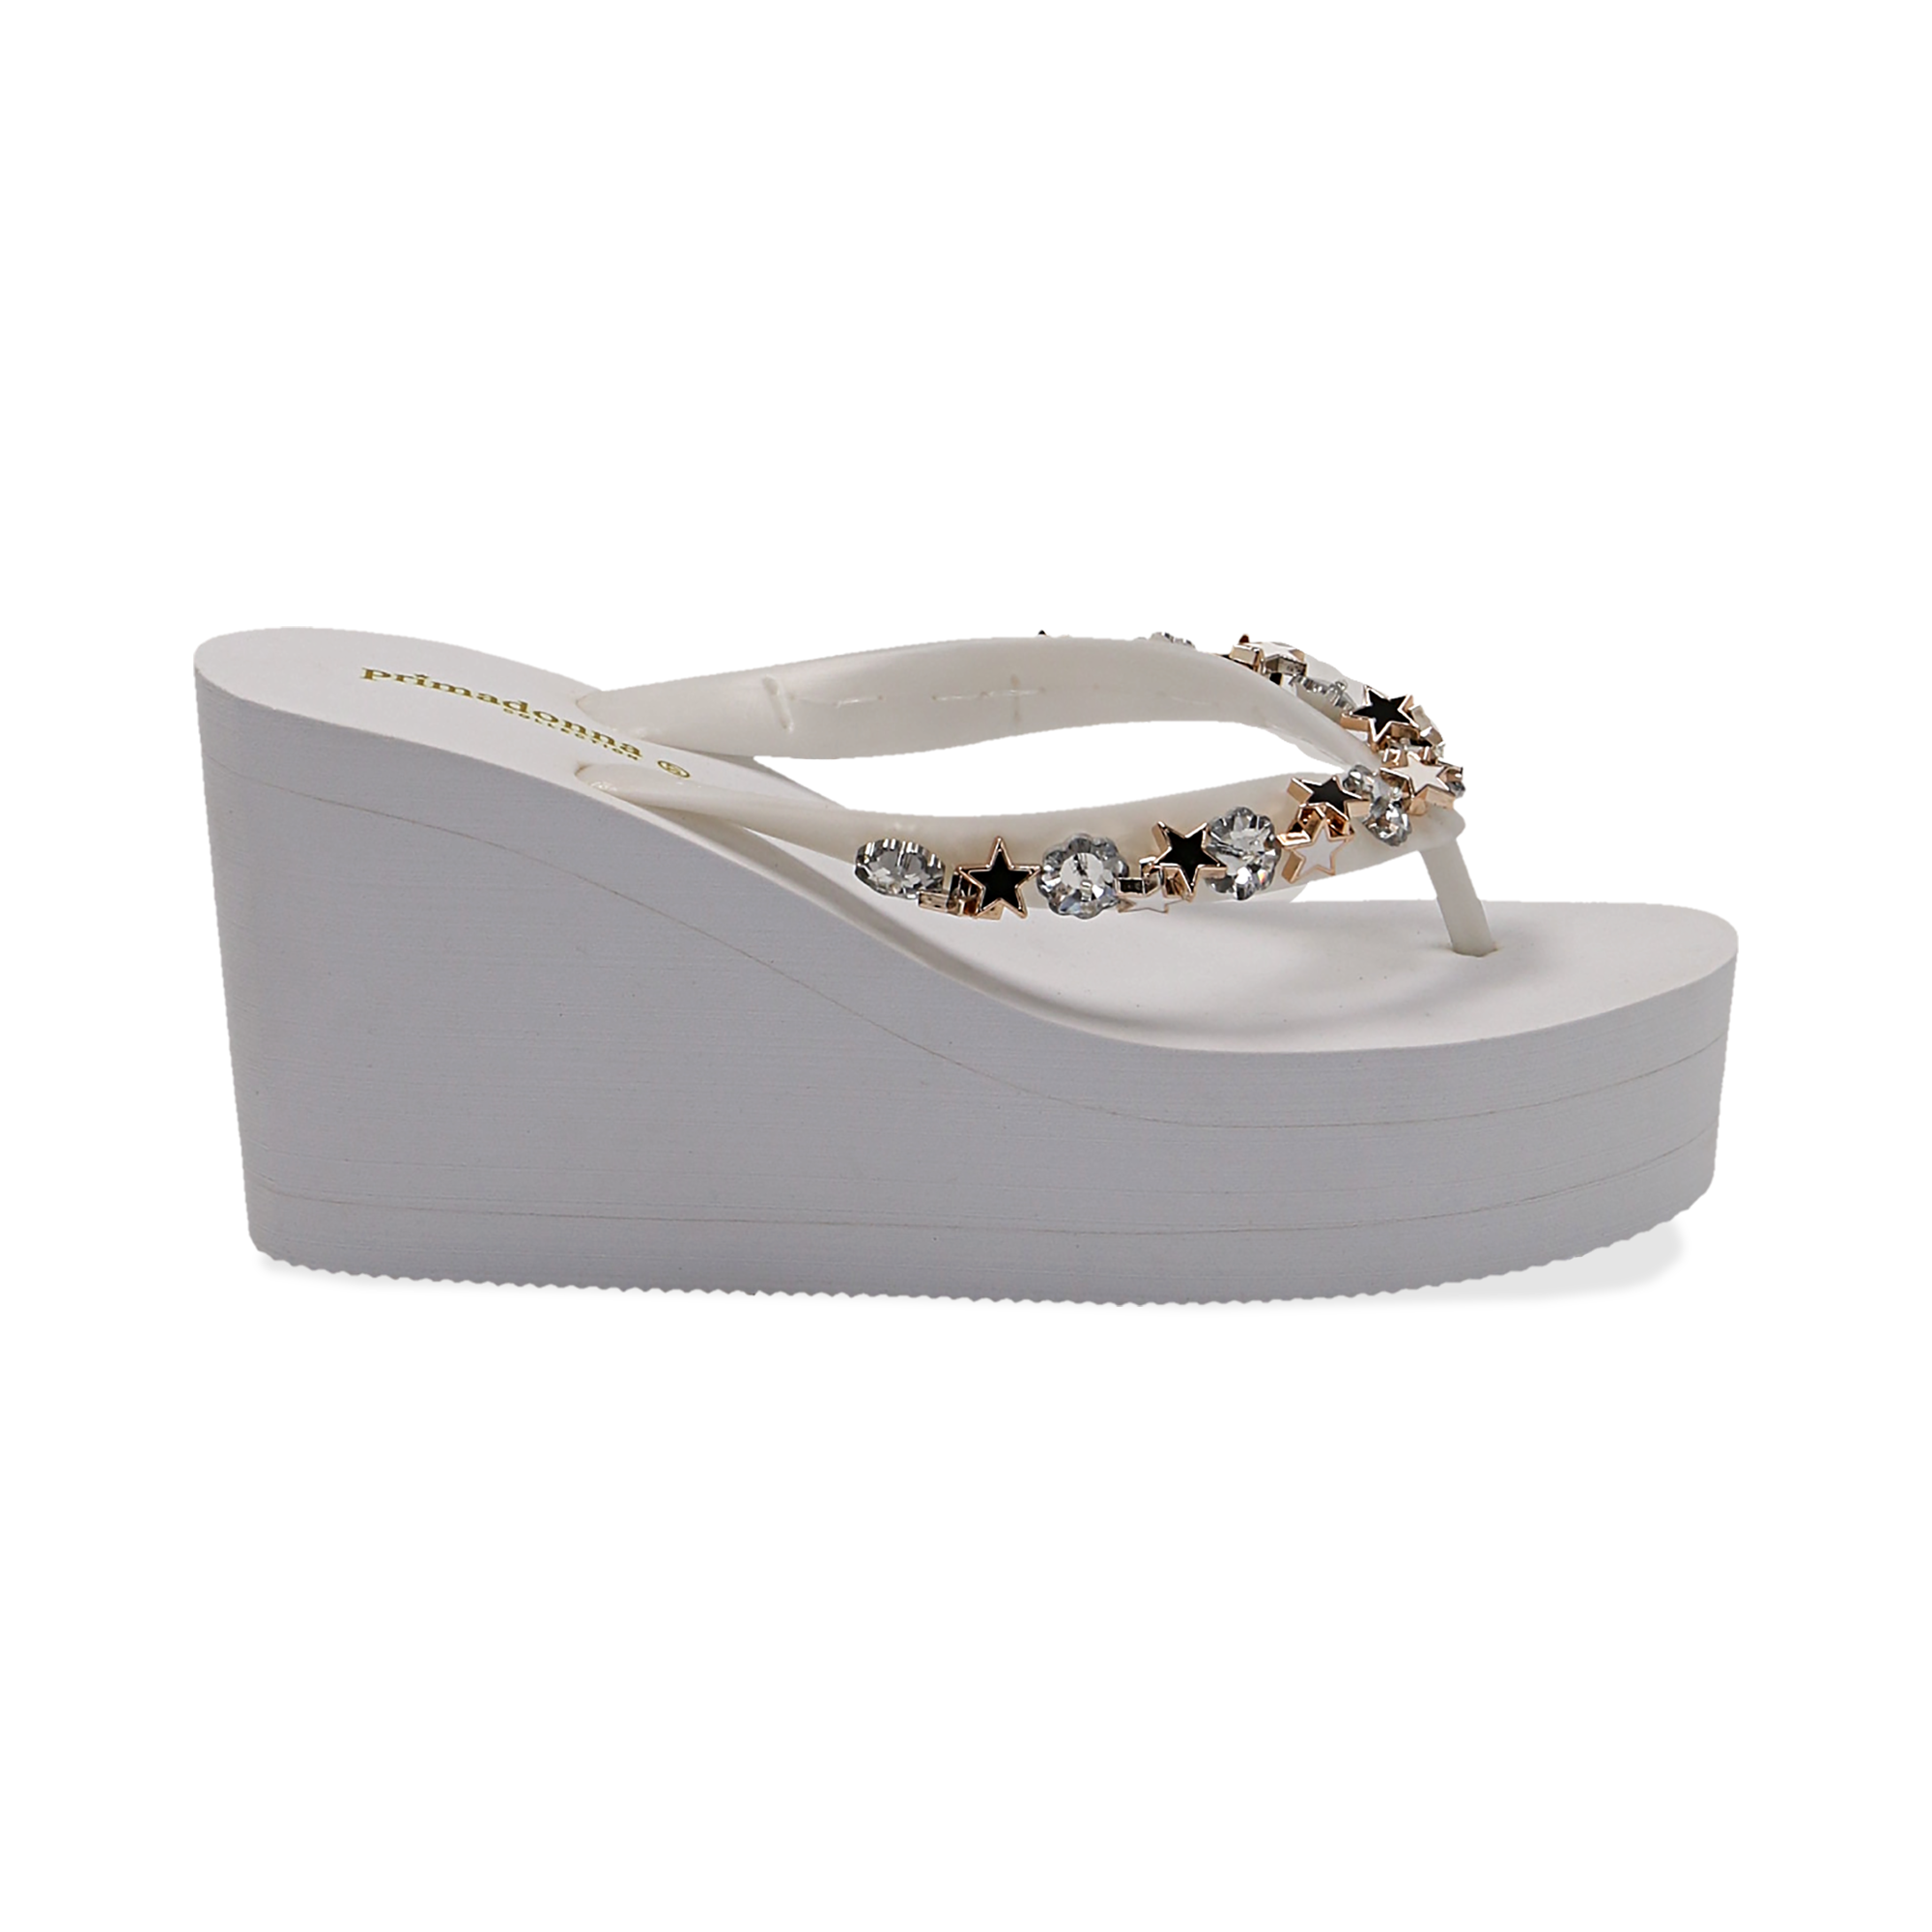 Zeppe infradito bianche in pvc, zeppa 8,50 cm donna | Primadonna Collection